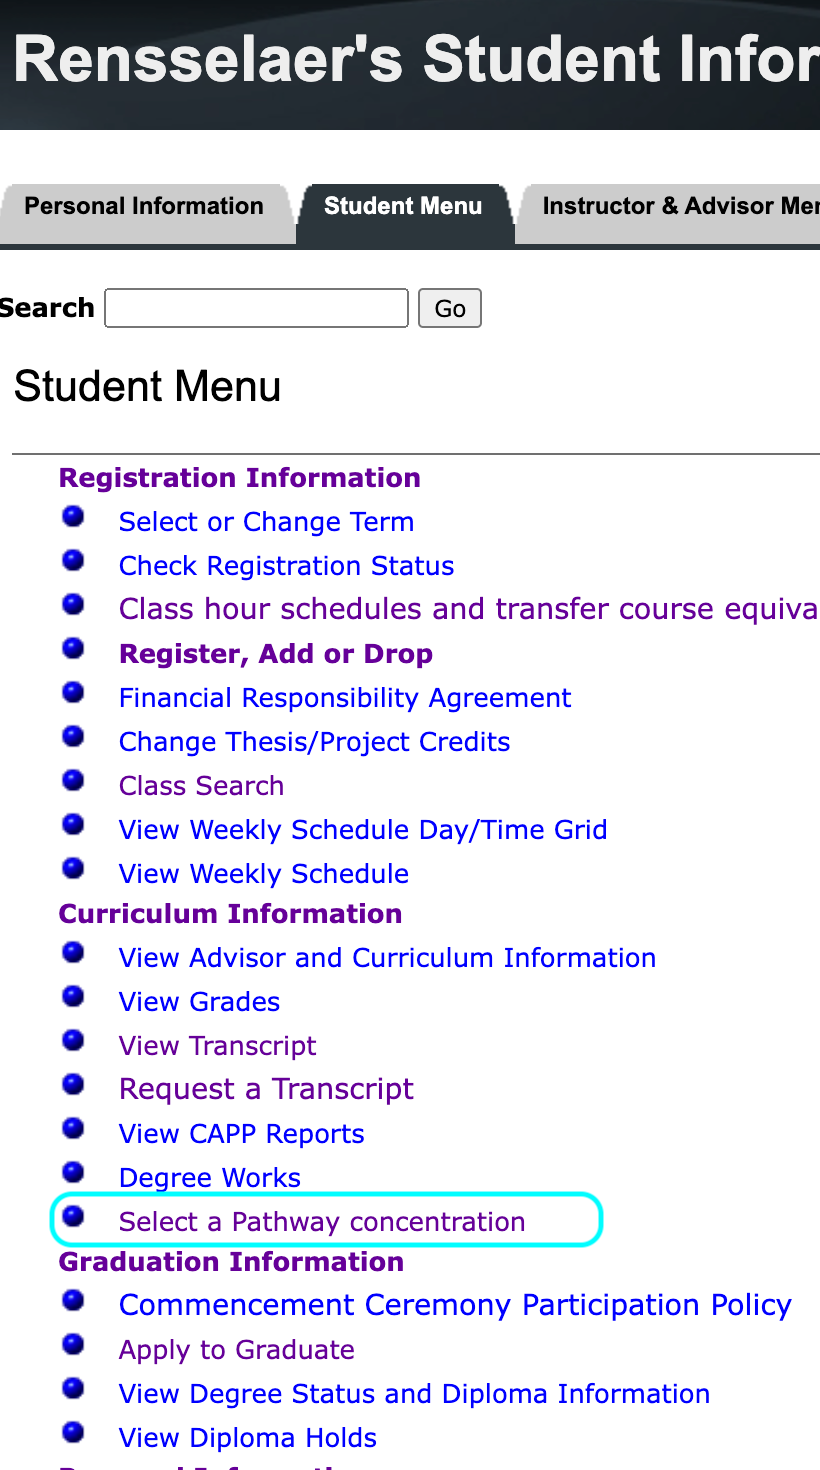 Screenshot of SIS, showing the link to where student's declare their Pathway